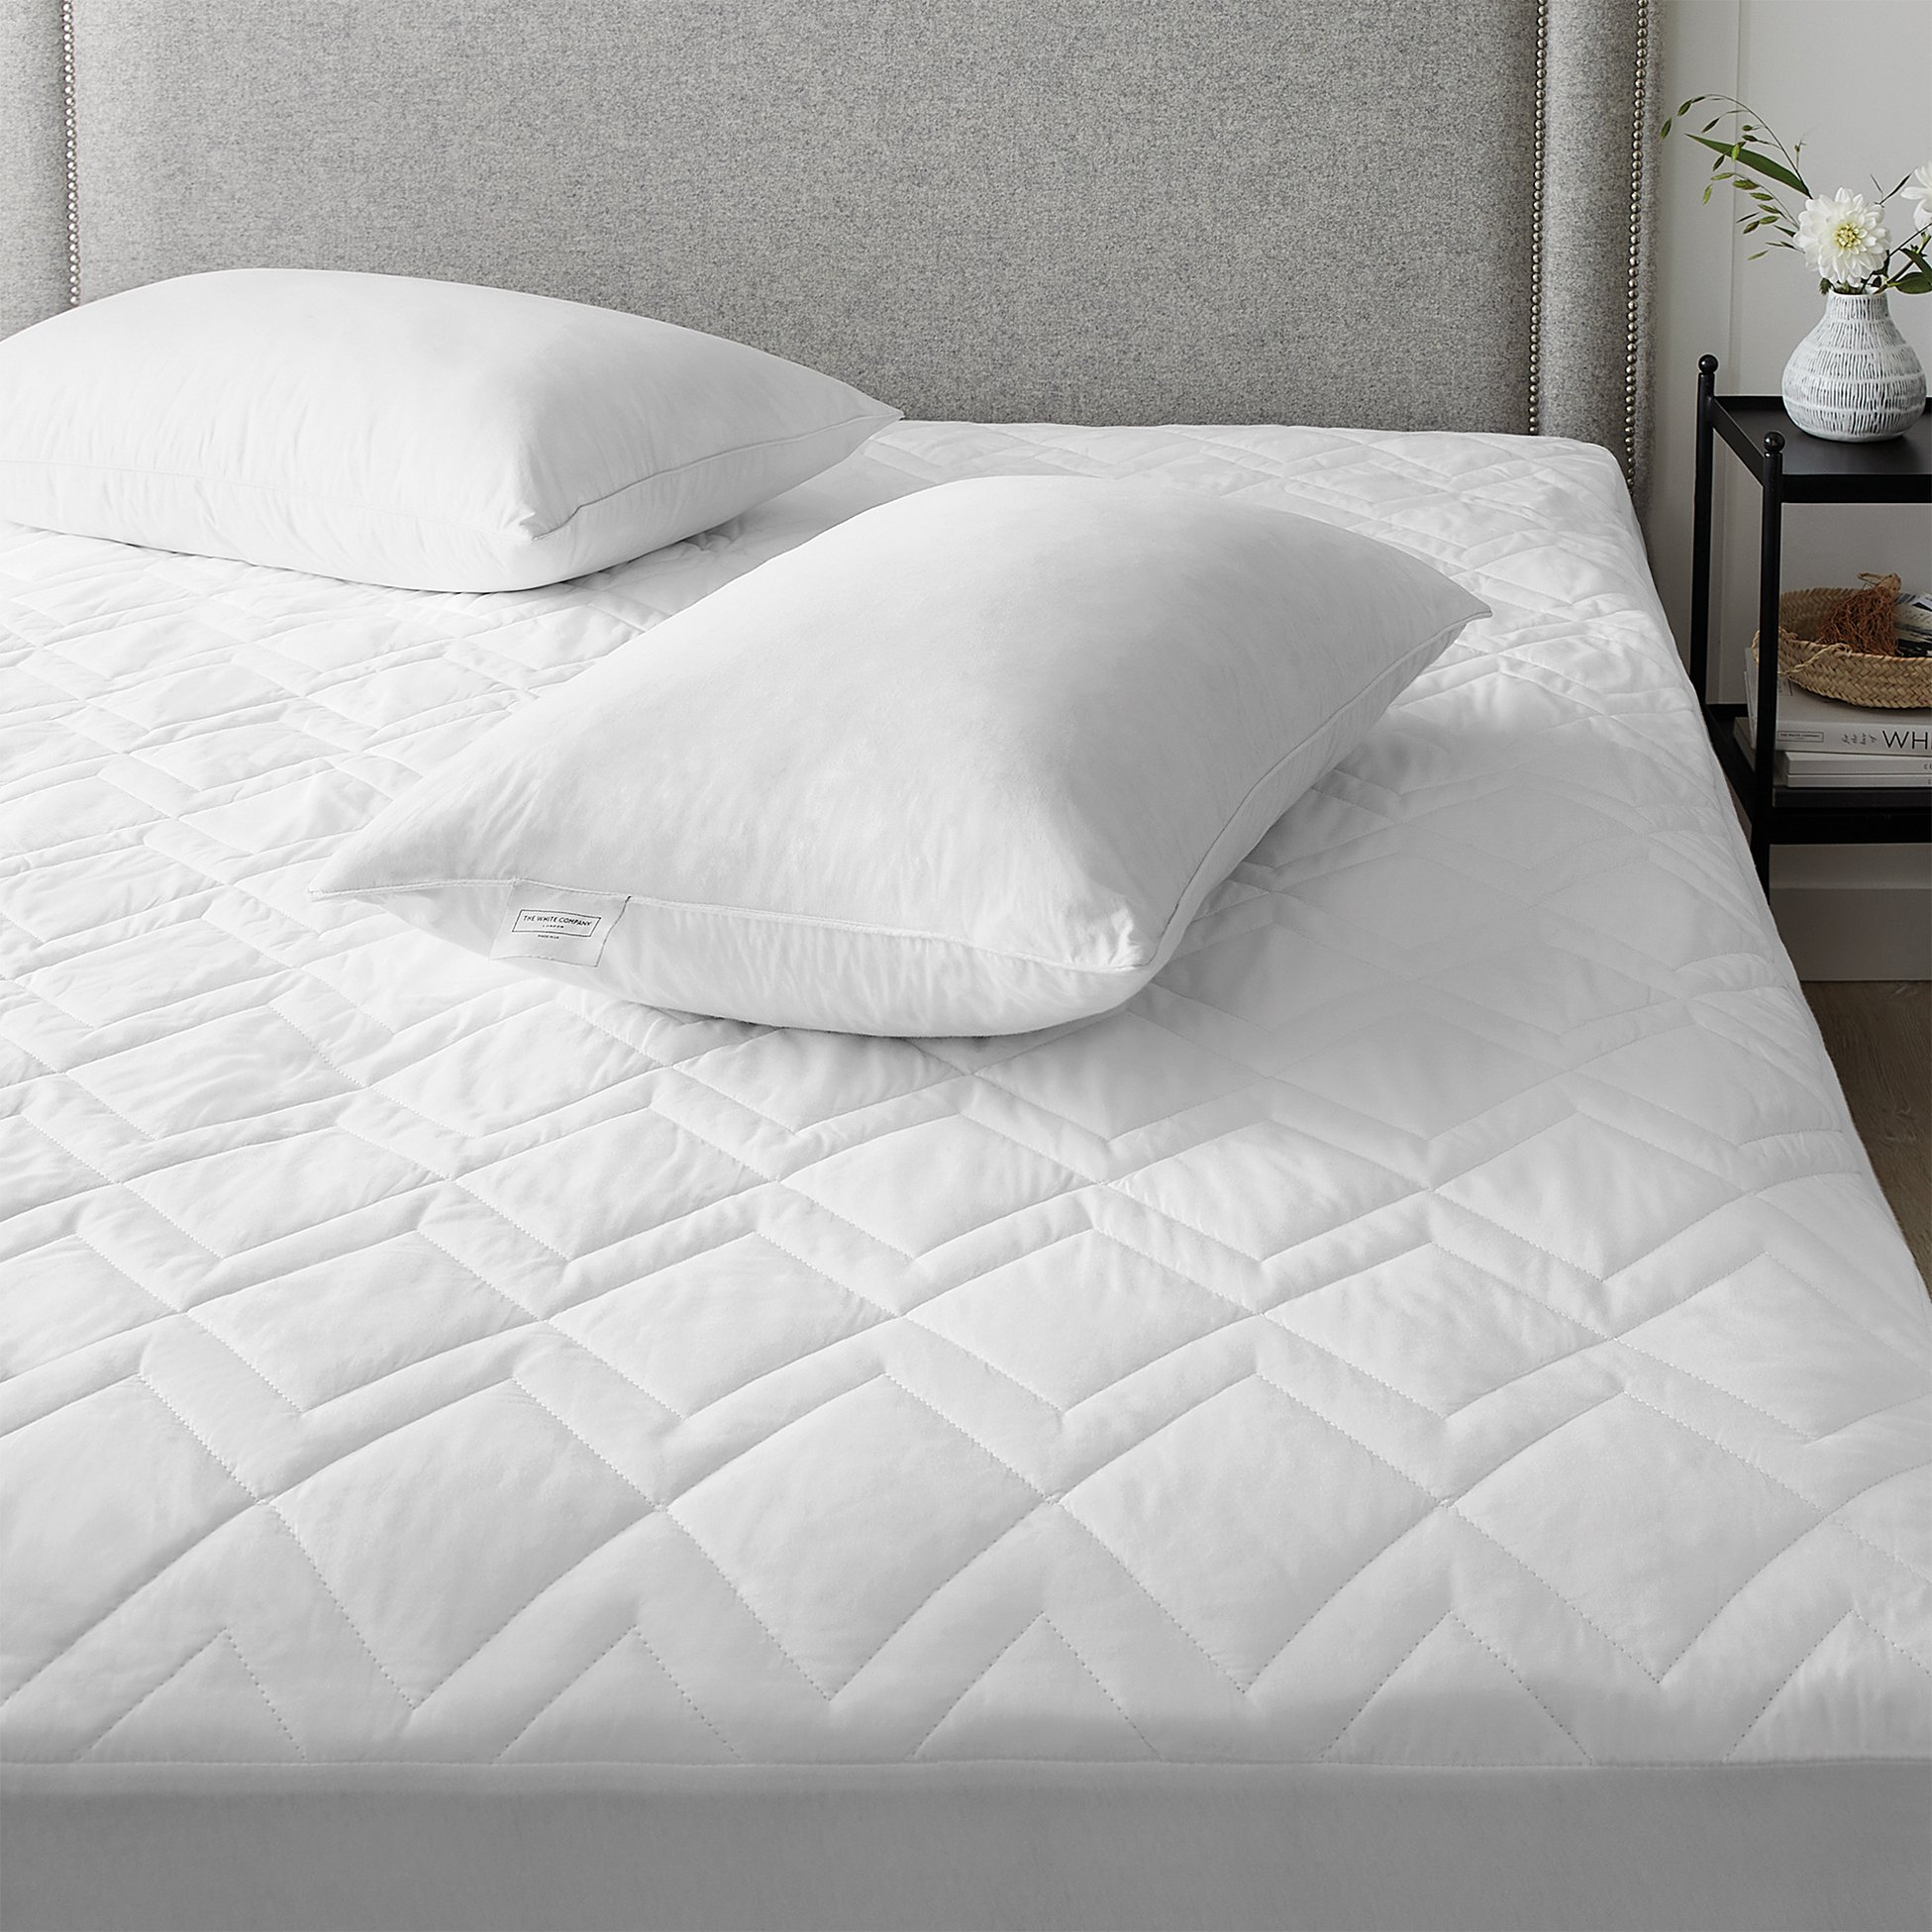 Details about   The Fine Bedding Company Quilted Luxury Waterproof Mattress Protector 